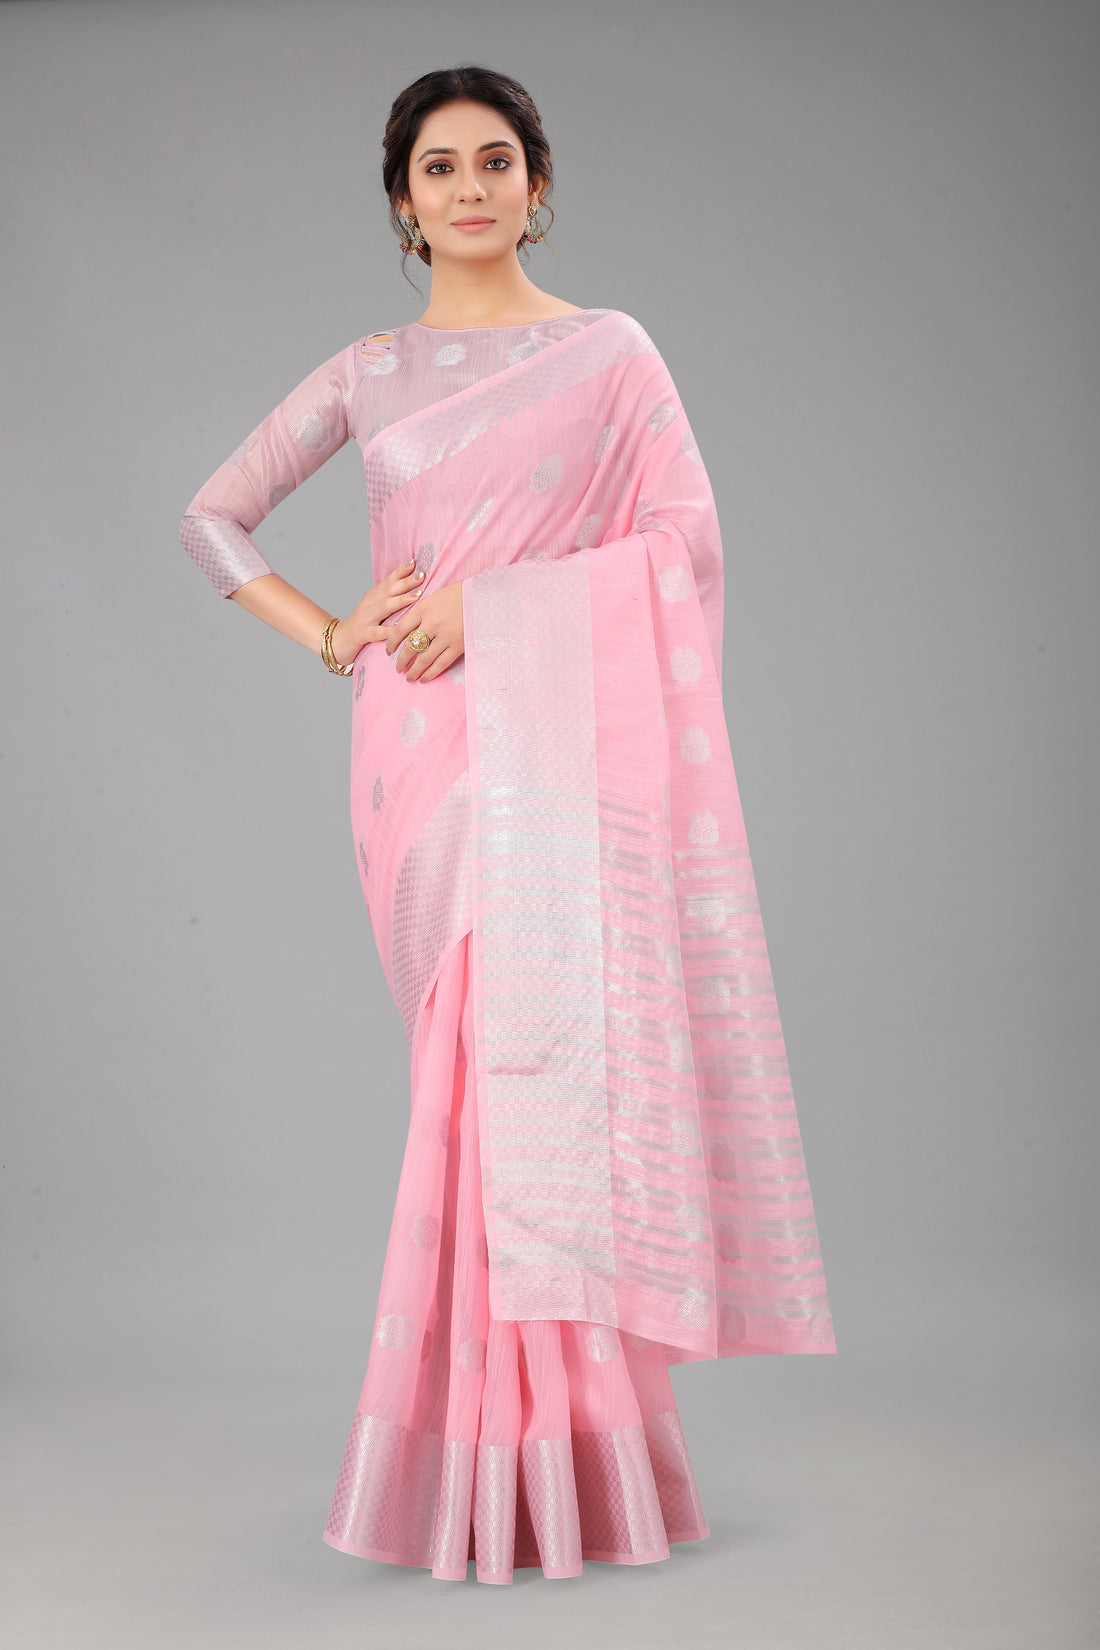 PeonyPink-Colored Cotton Silk Saree Set Complete with Matching Blouse